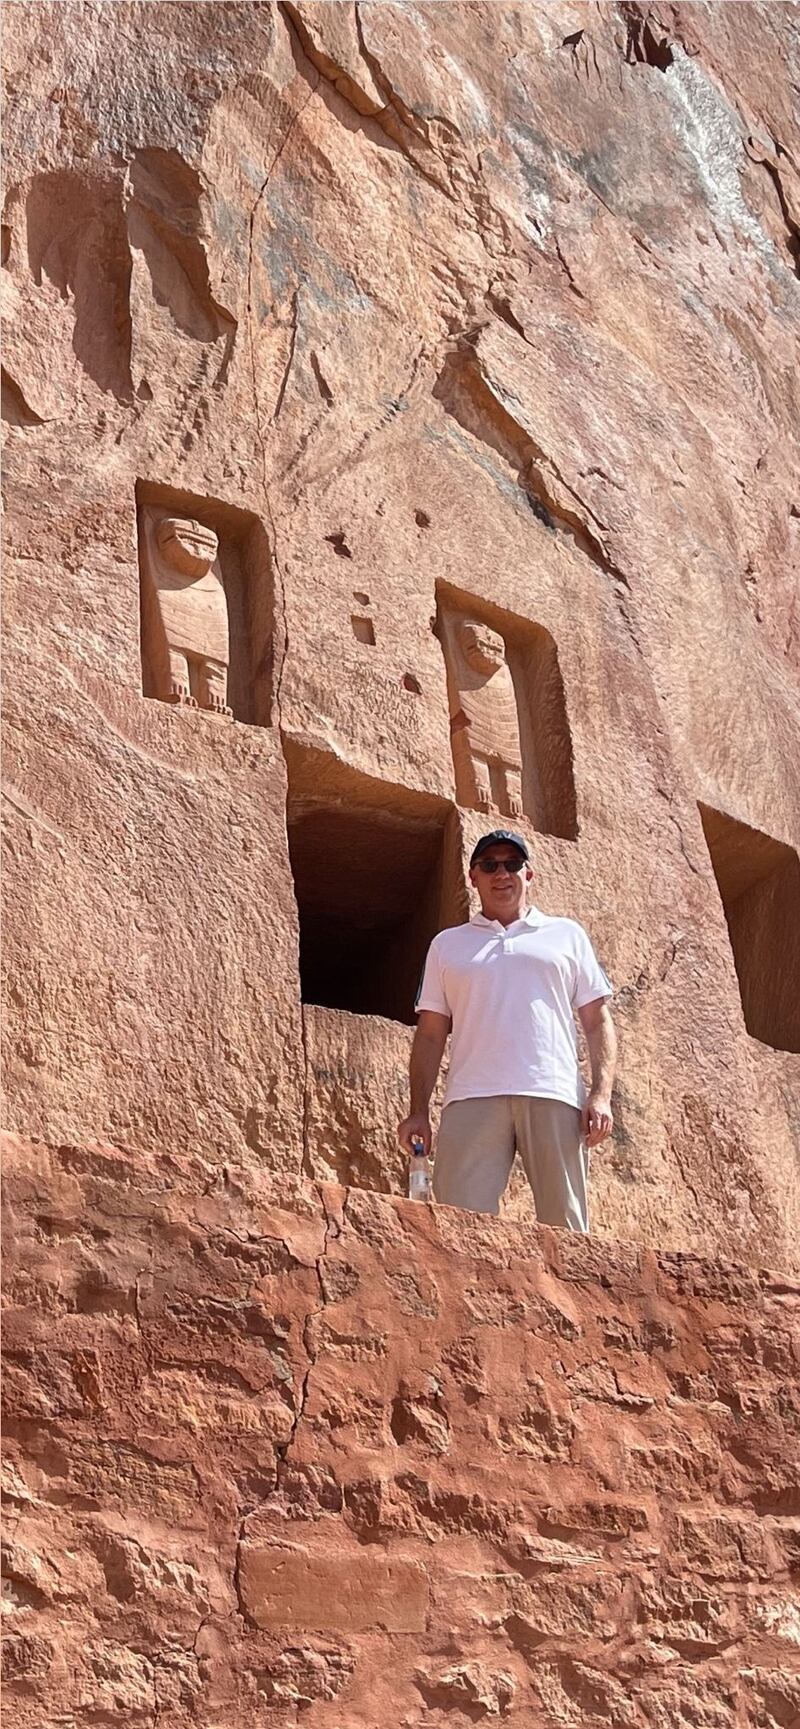 One of several pictures shared by the ambassador of his trip to AlUla on social media.